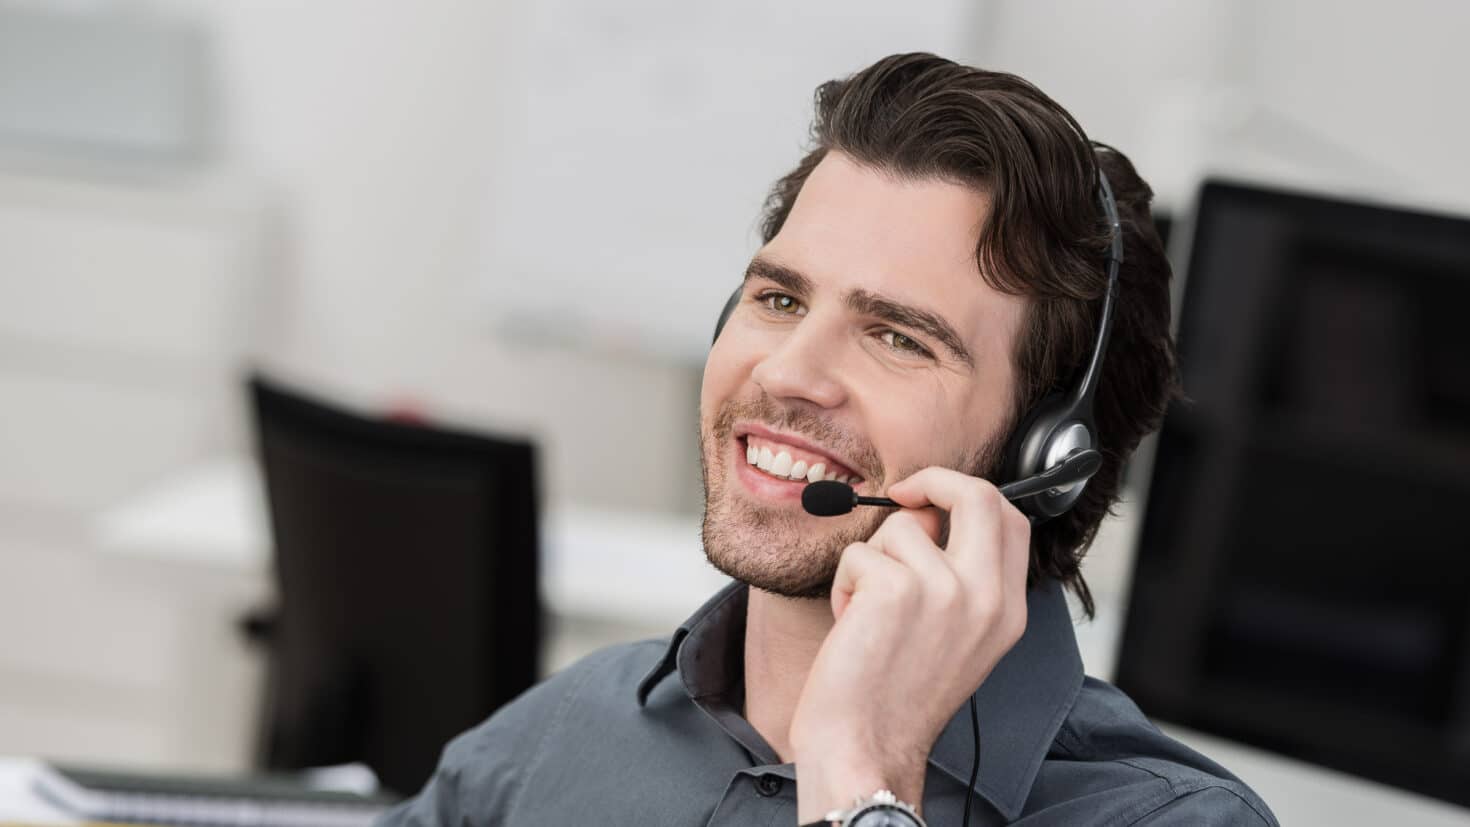 Our Service Desk provides 24-hour support on request